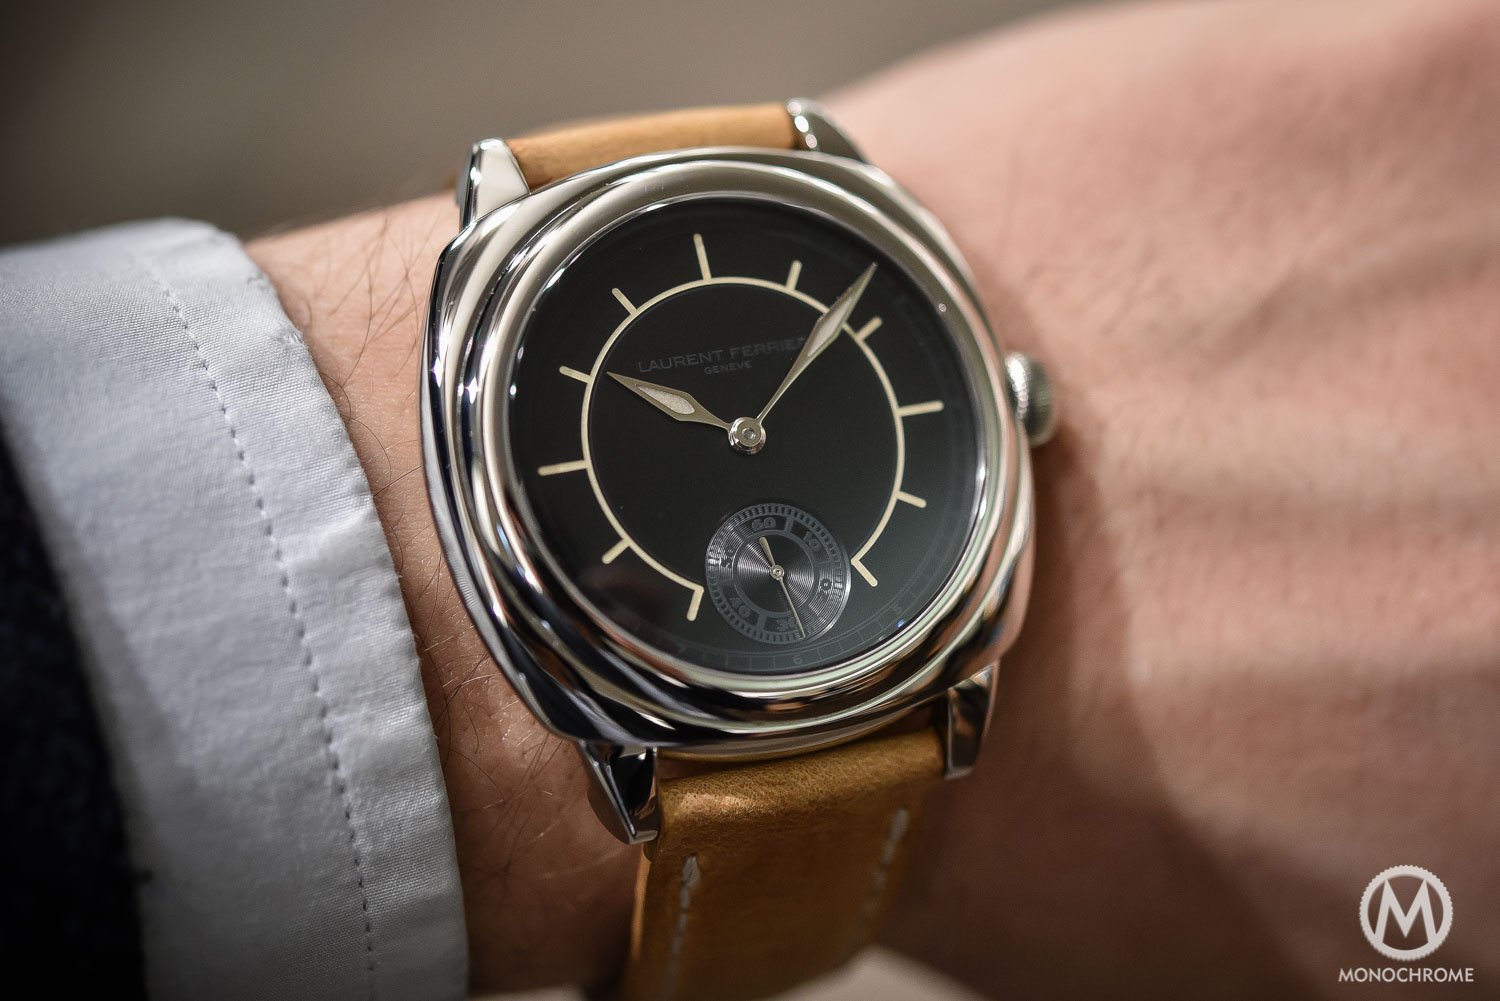 Laurent Ferrier Galet Square Boreal SIHH 2016 - _0915